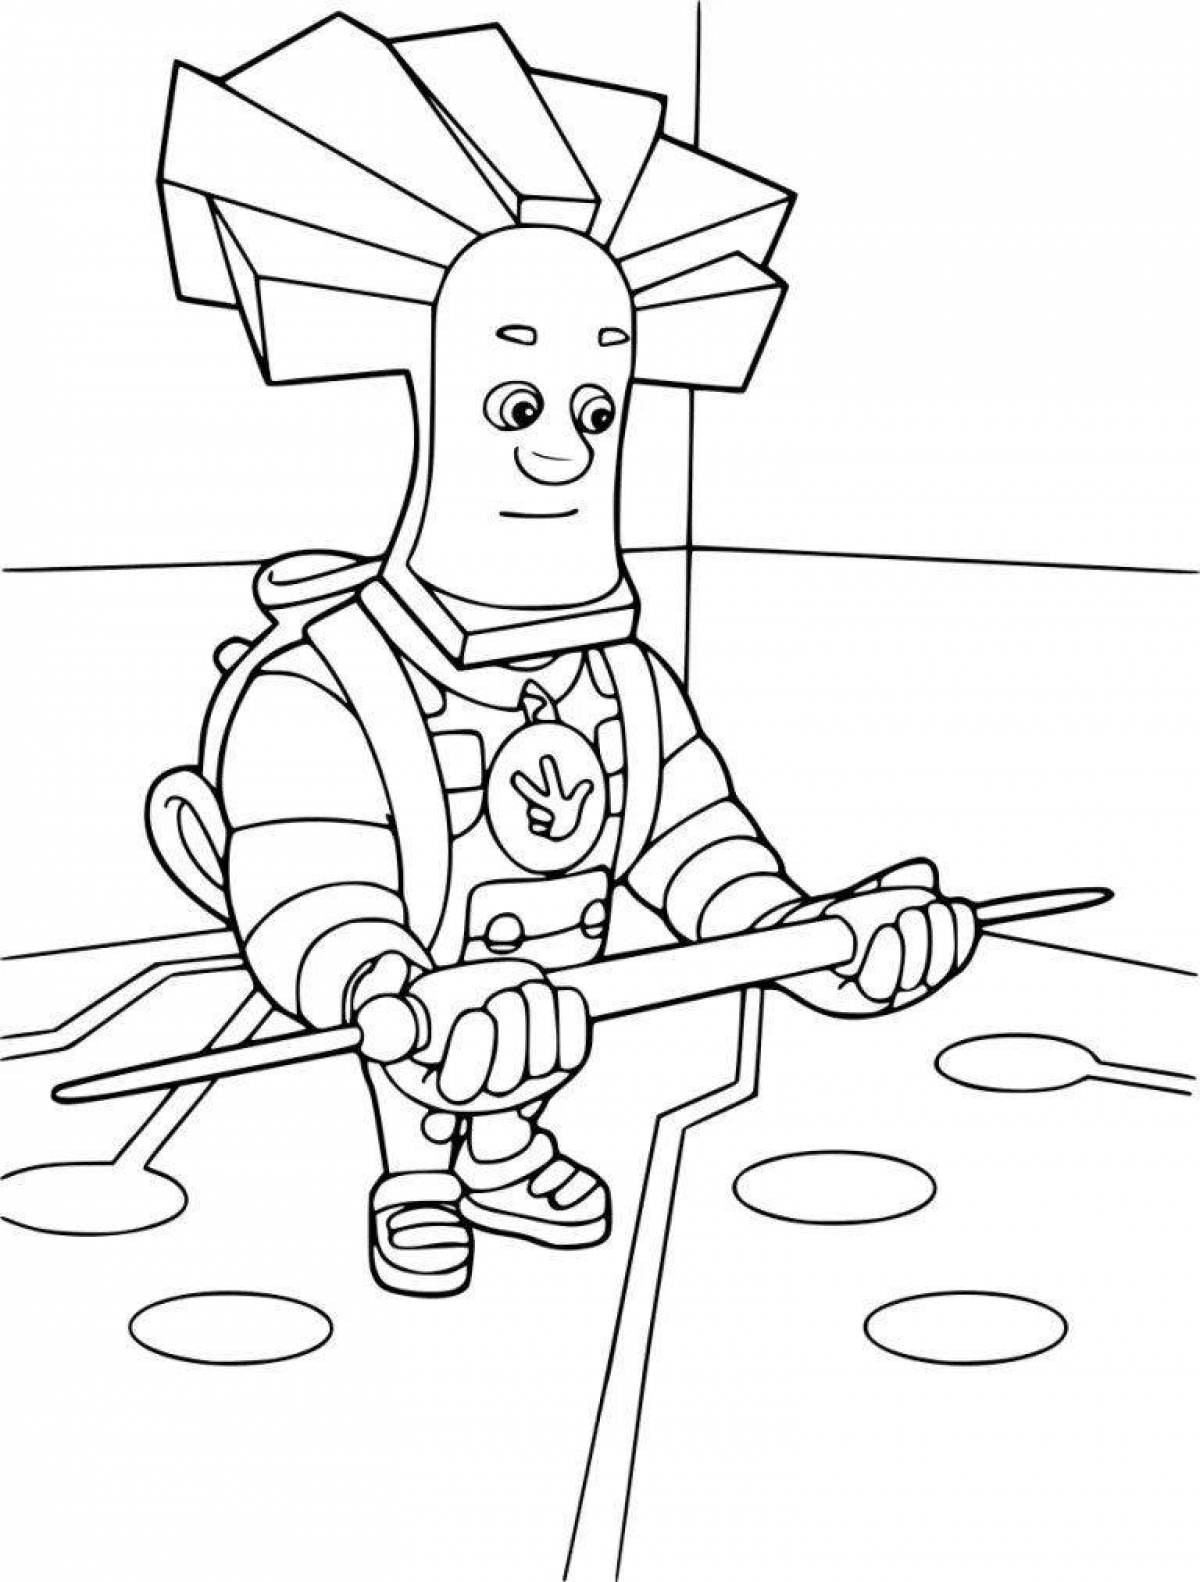 Sparkling Fixies Coloring Page for Toddlers